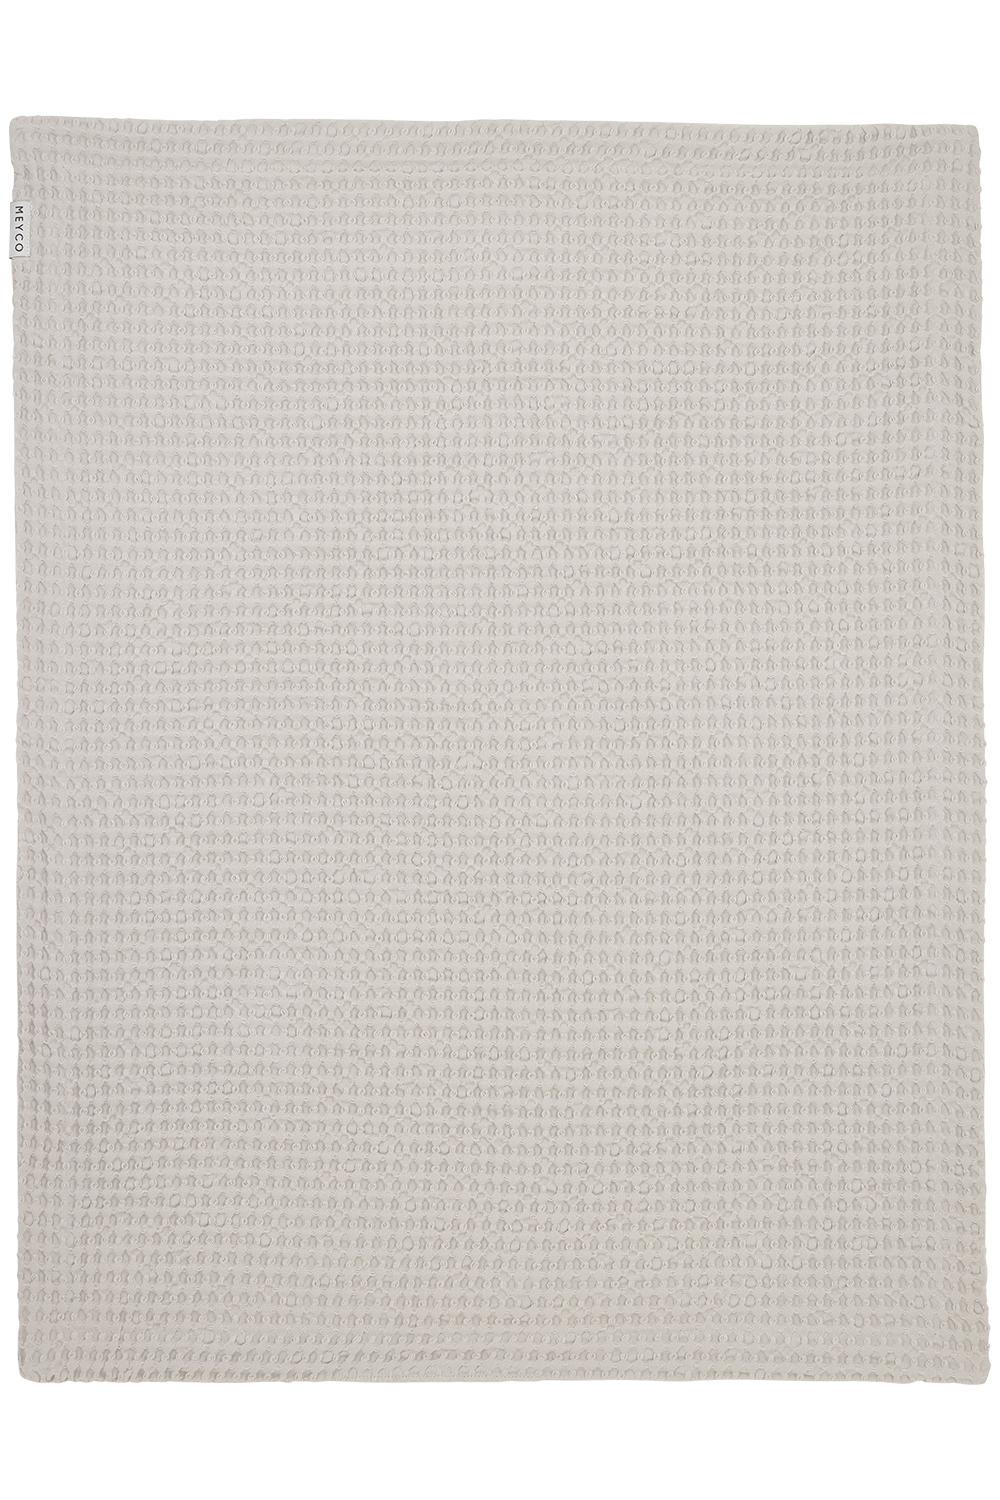 Cot bed blanket Waffle Cotton - greige - 100x150cm